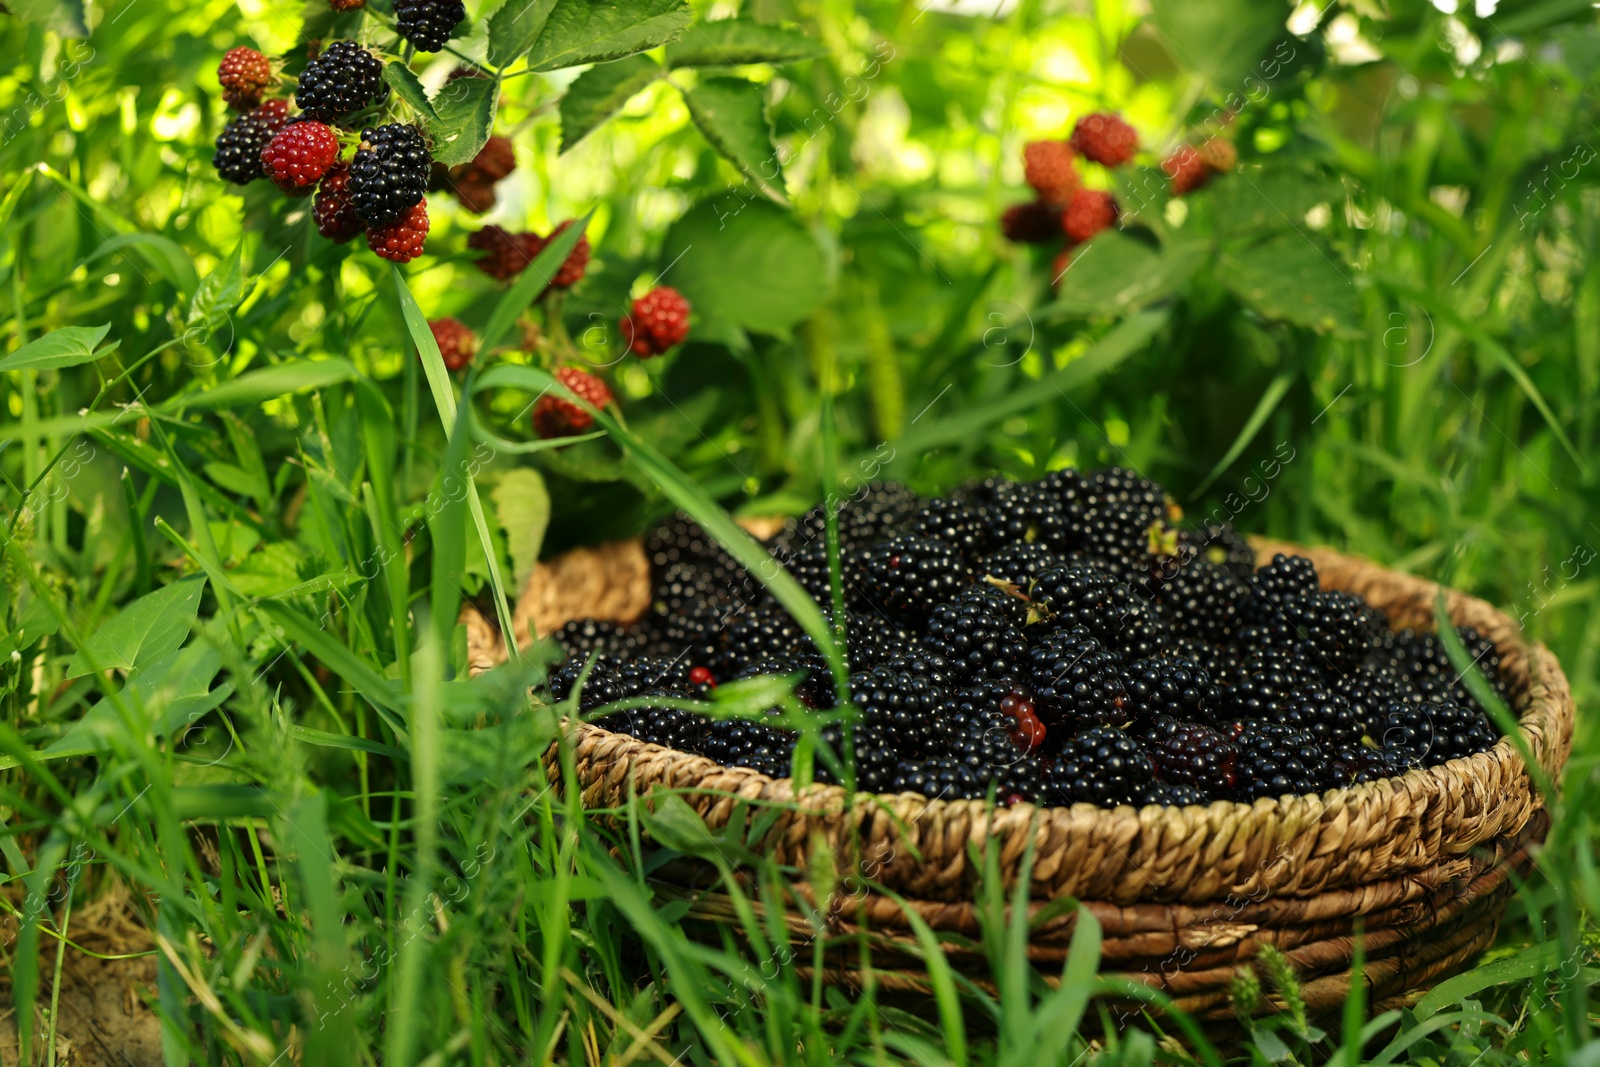 Photo of Wicker bowl with tasty ripe blackberries on green grass outdoors